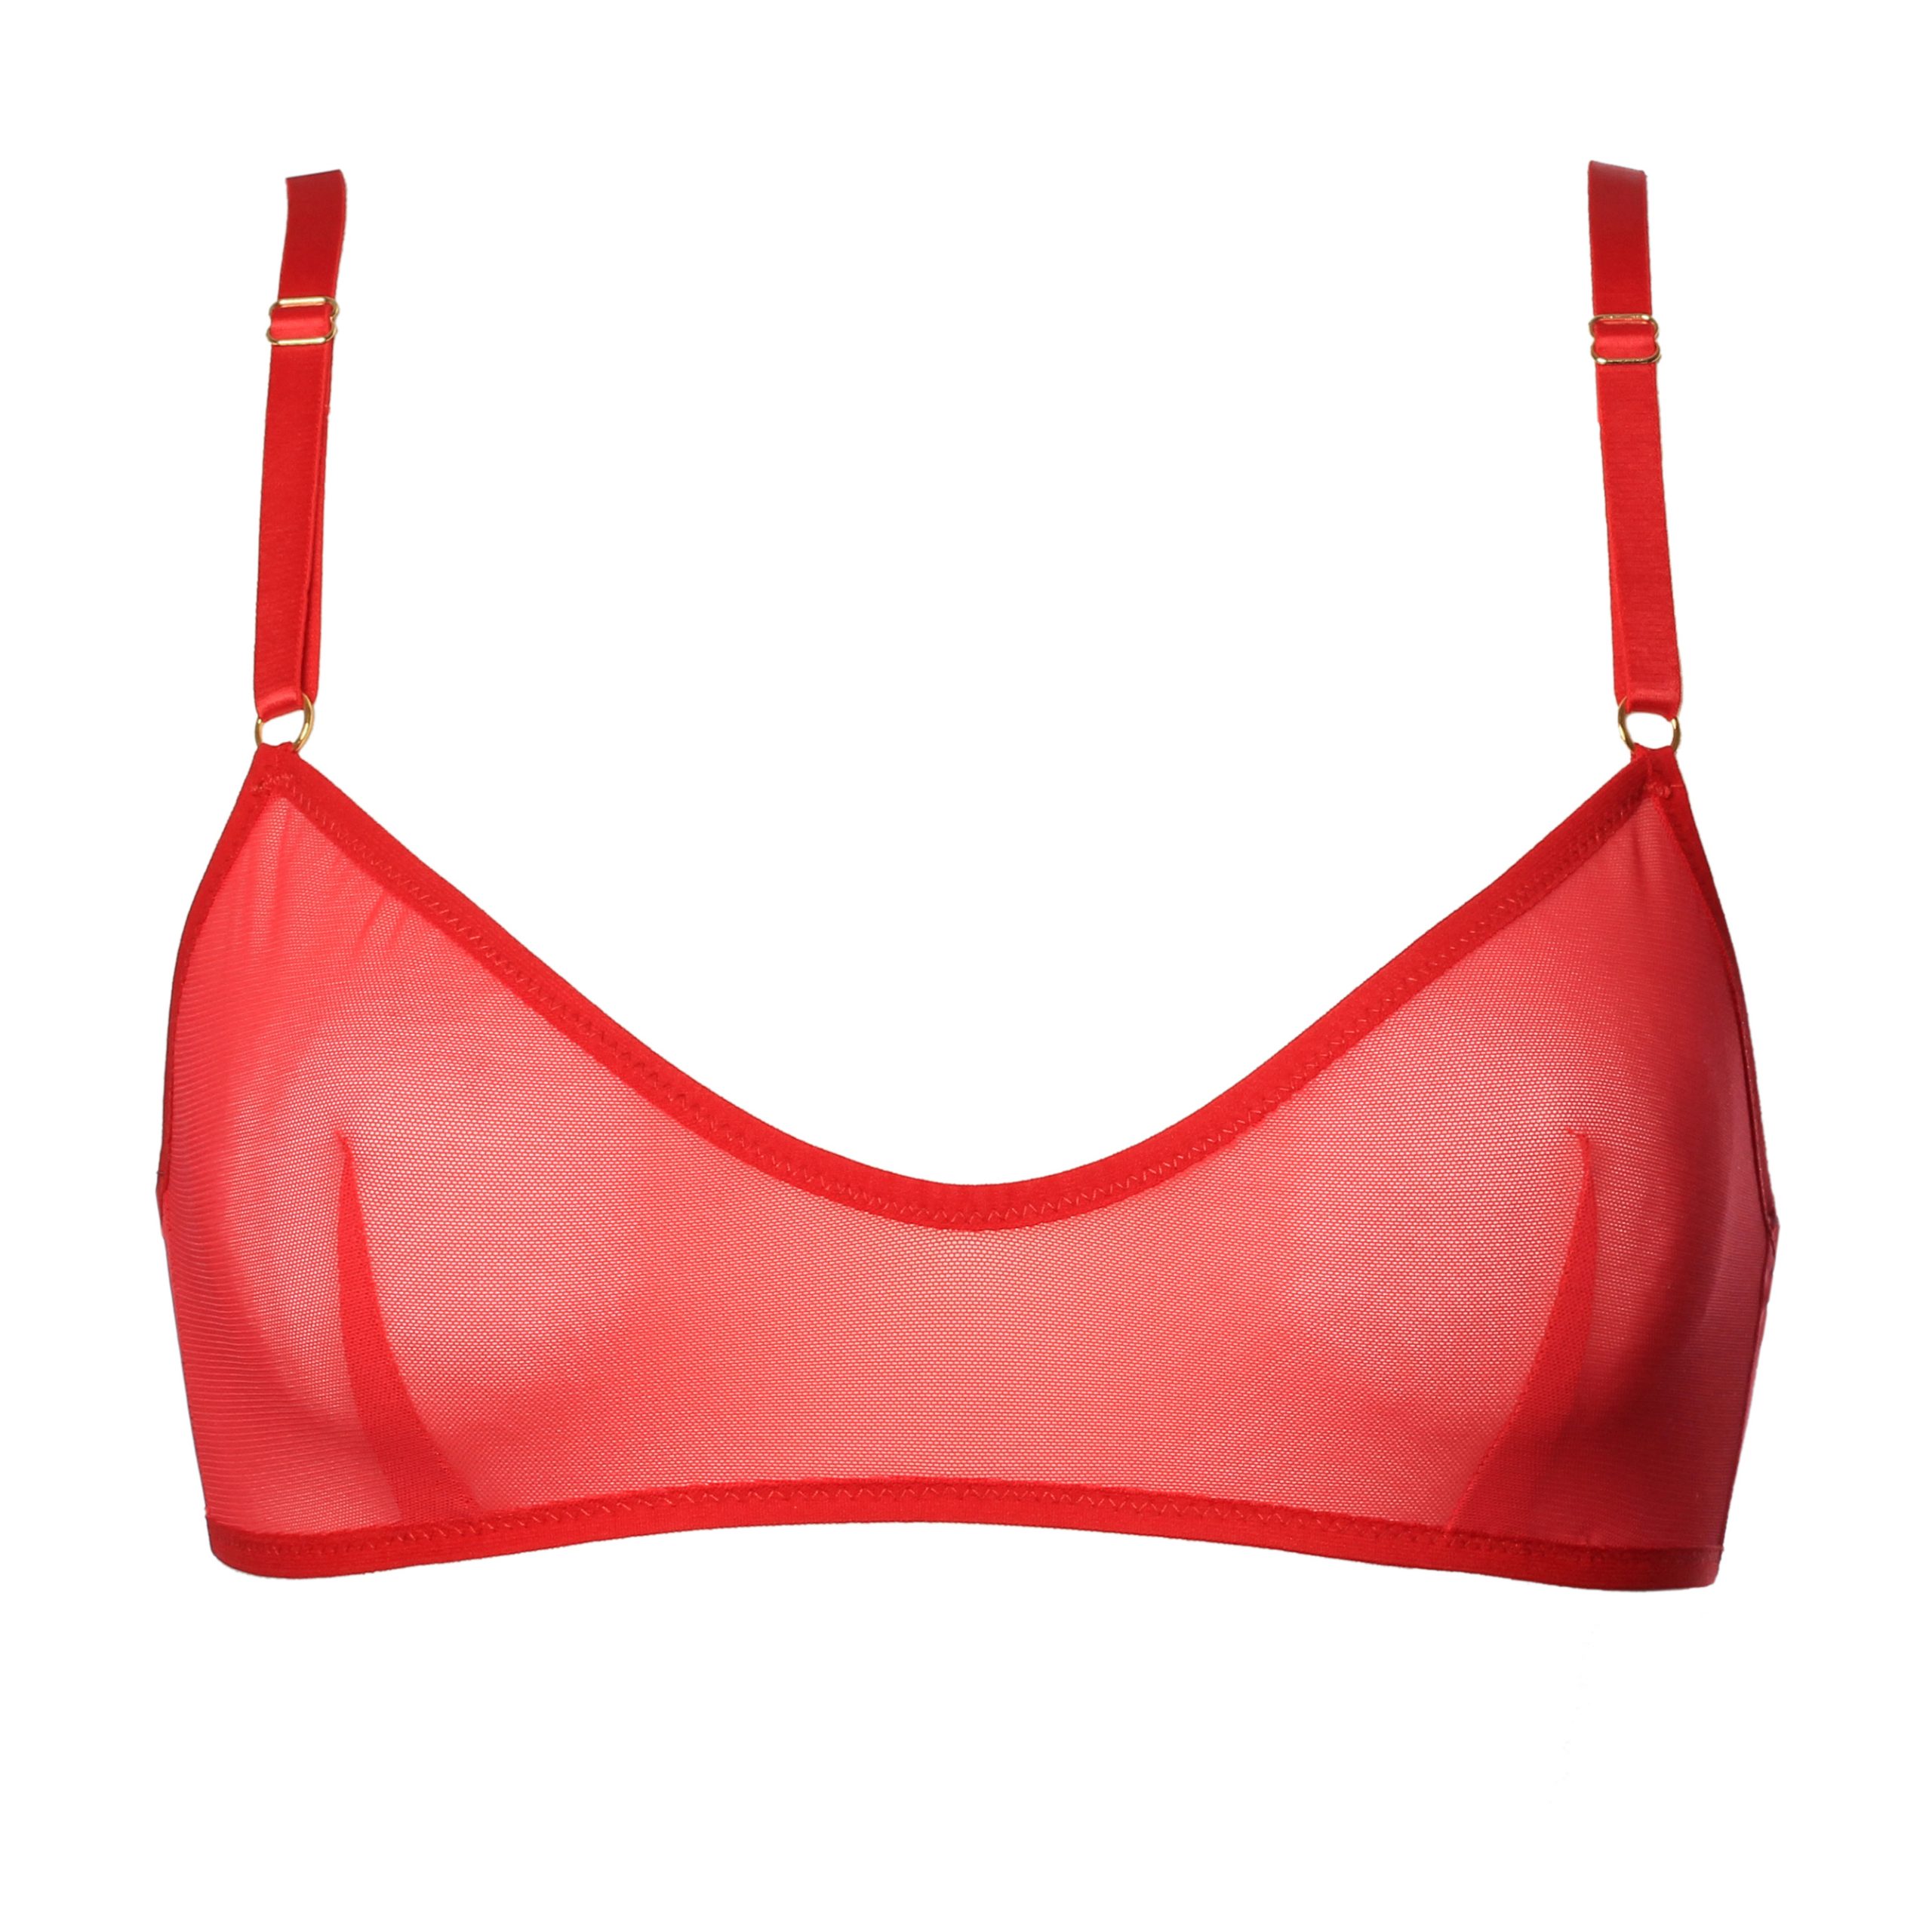 Red Mesh Bralette by Flash you and me Lingerie